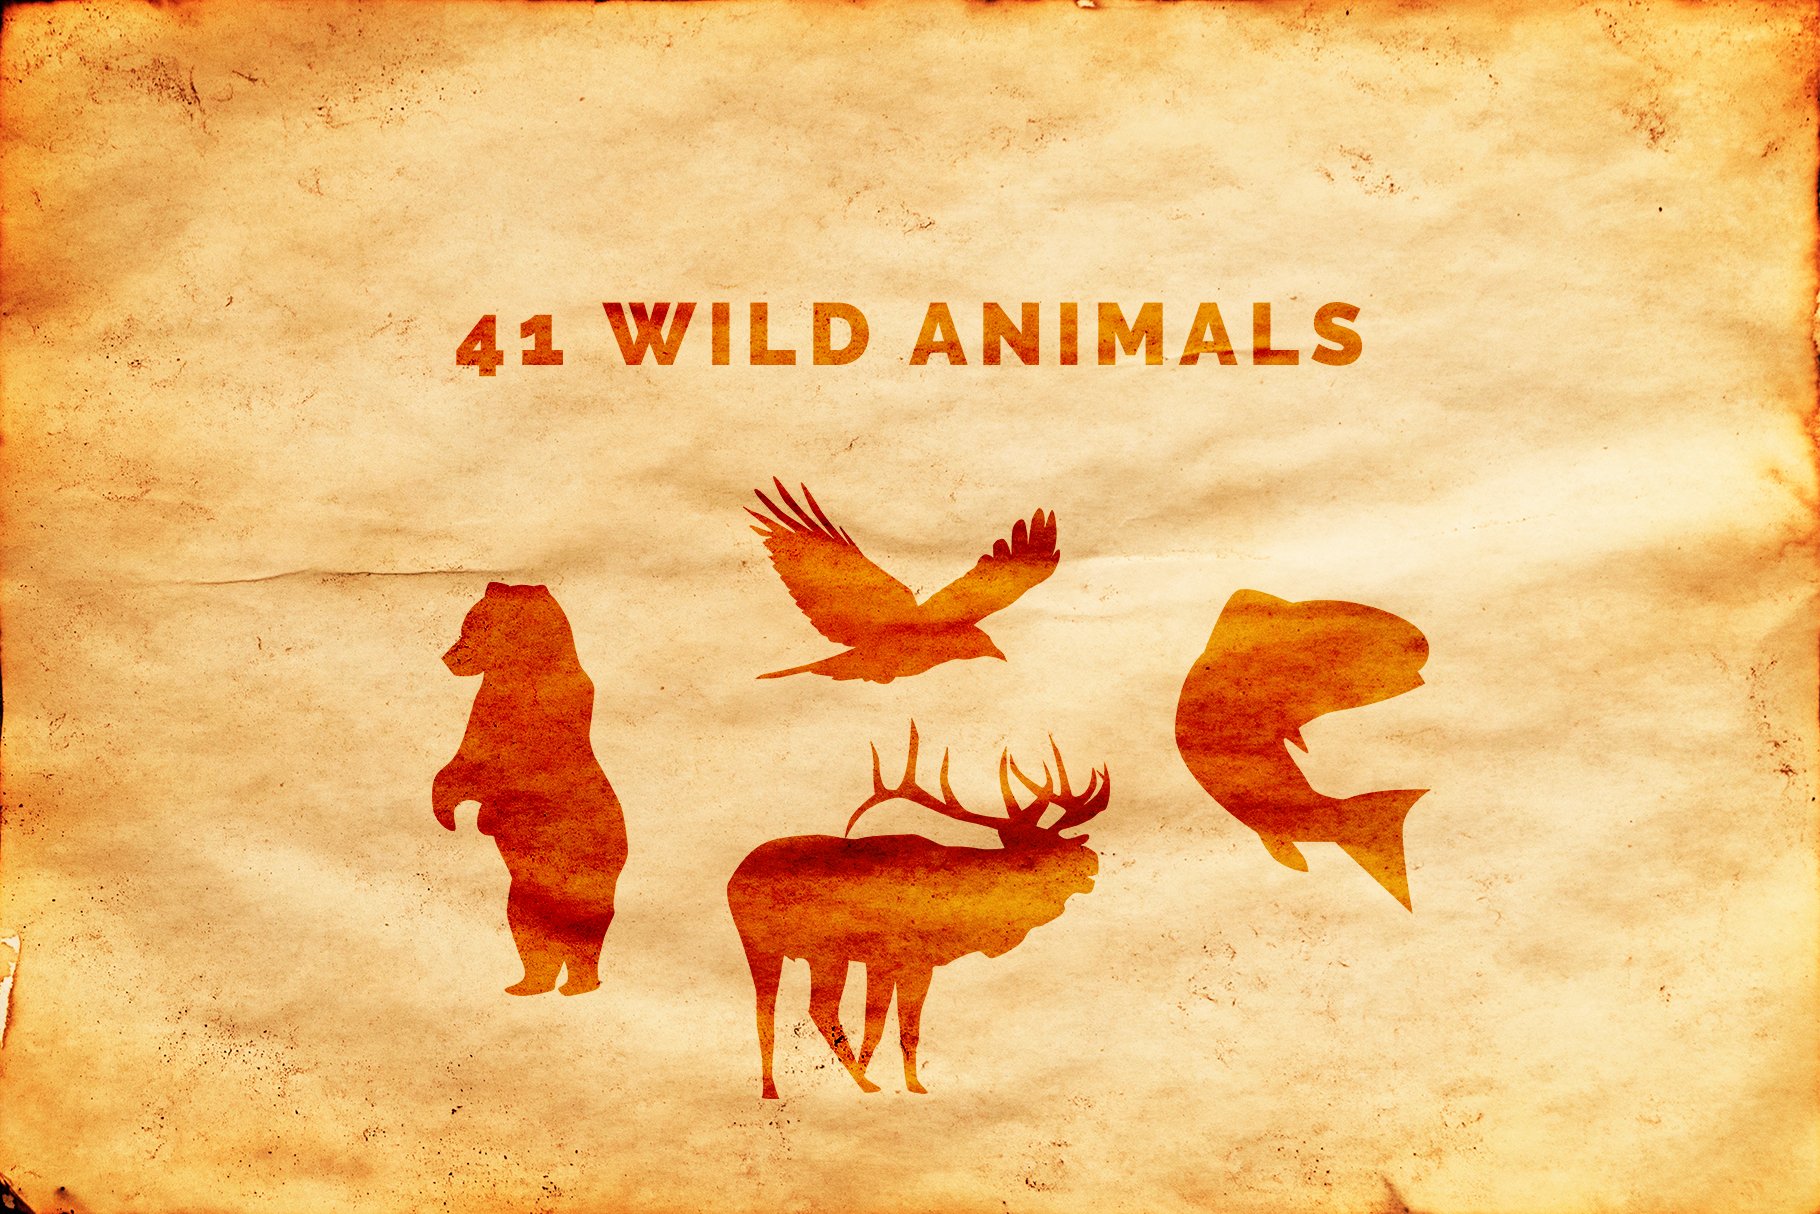 Wild Animals of North America preview image.